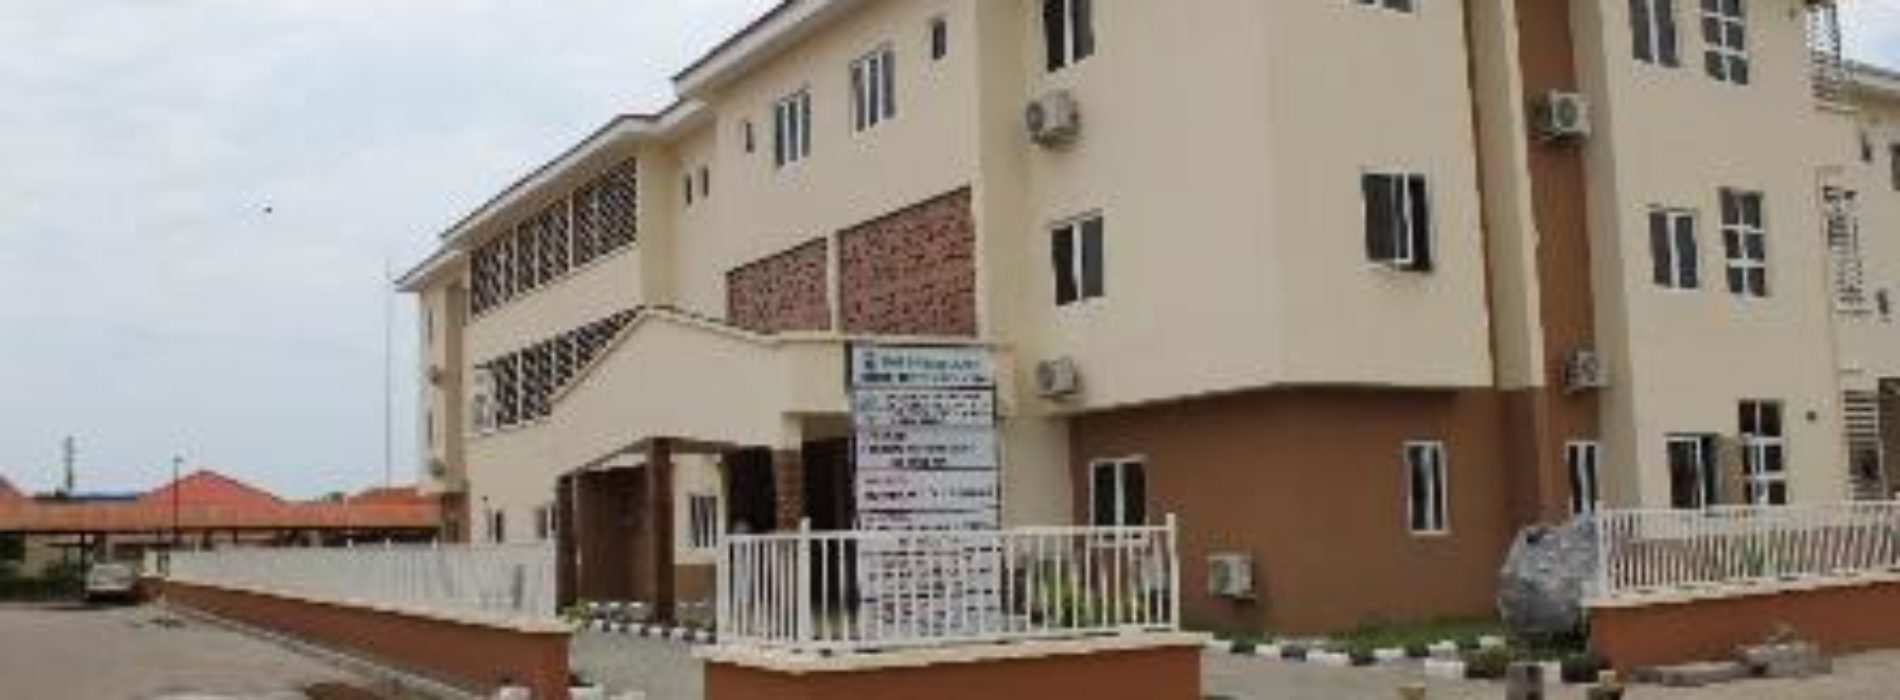 FG donates 149-bed specialist hospital for mothers, children to Lagos state